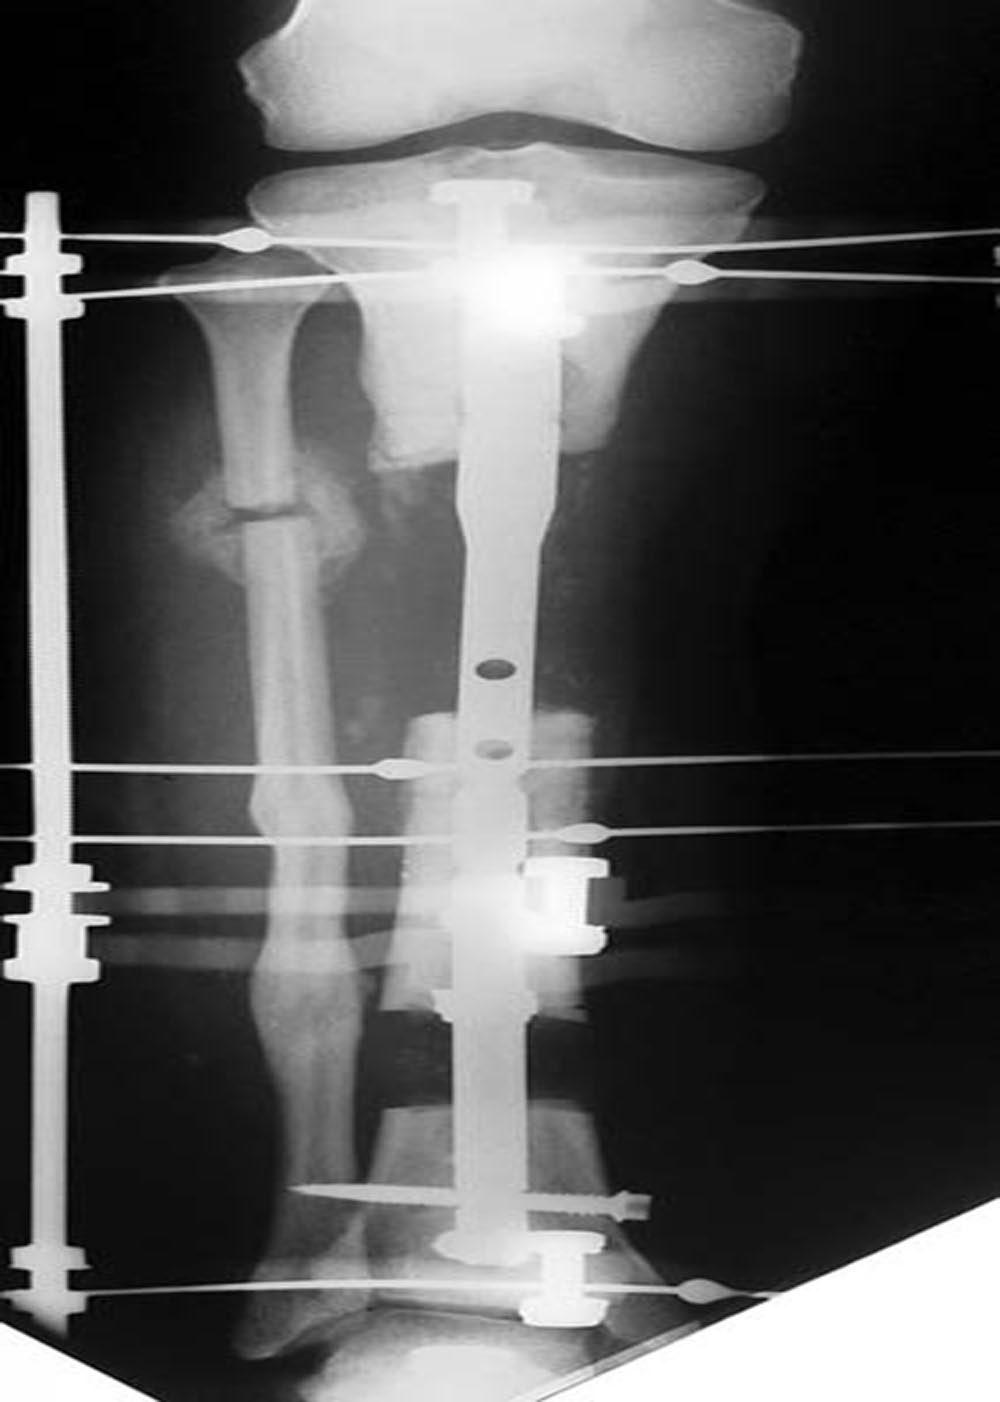 2141 Fig. 1-C Fig. 1-D Fig. 1-C A radiograph made after radical resection of the infected bone segment with débridement and placement of antibiotic beads. Fig. 1-D Bone segment distraction with a circular external fixator over an intramedullary nail.